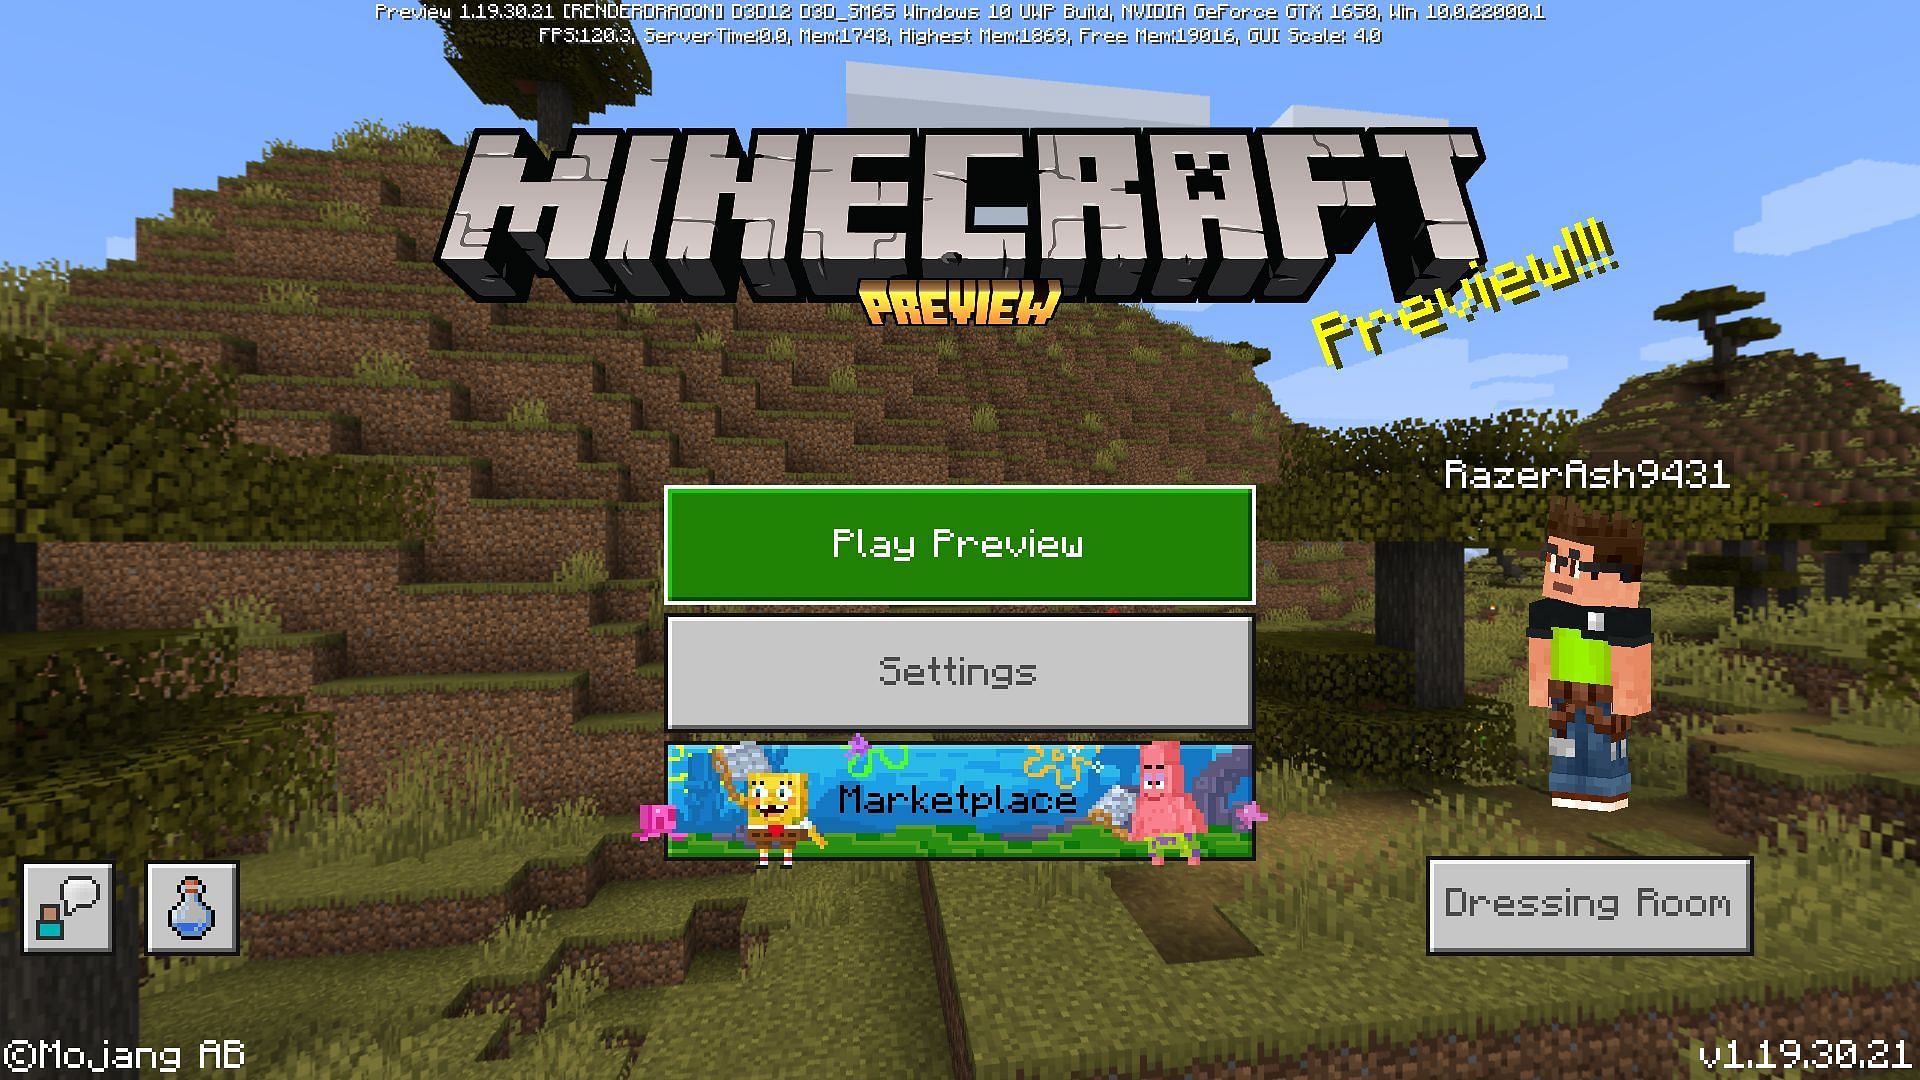 The new beta preview game version can be played normally (Image via Mojang)